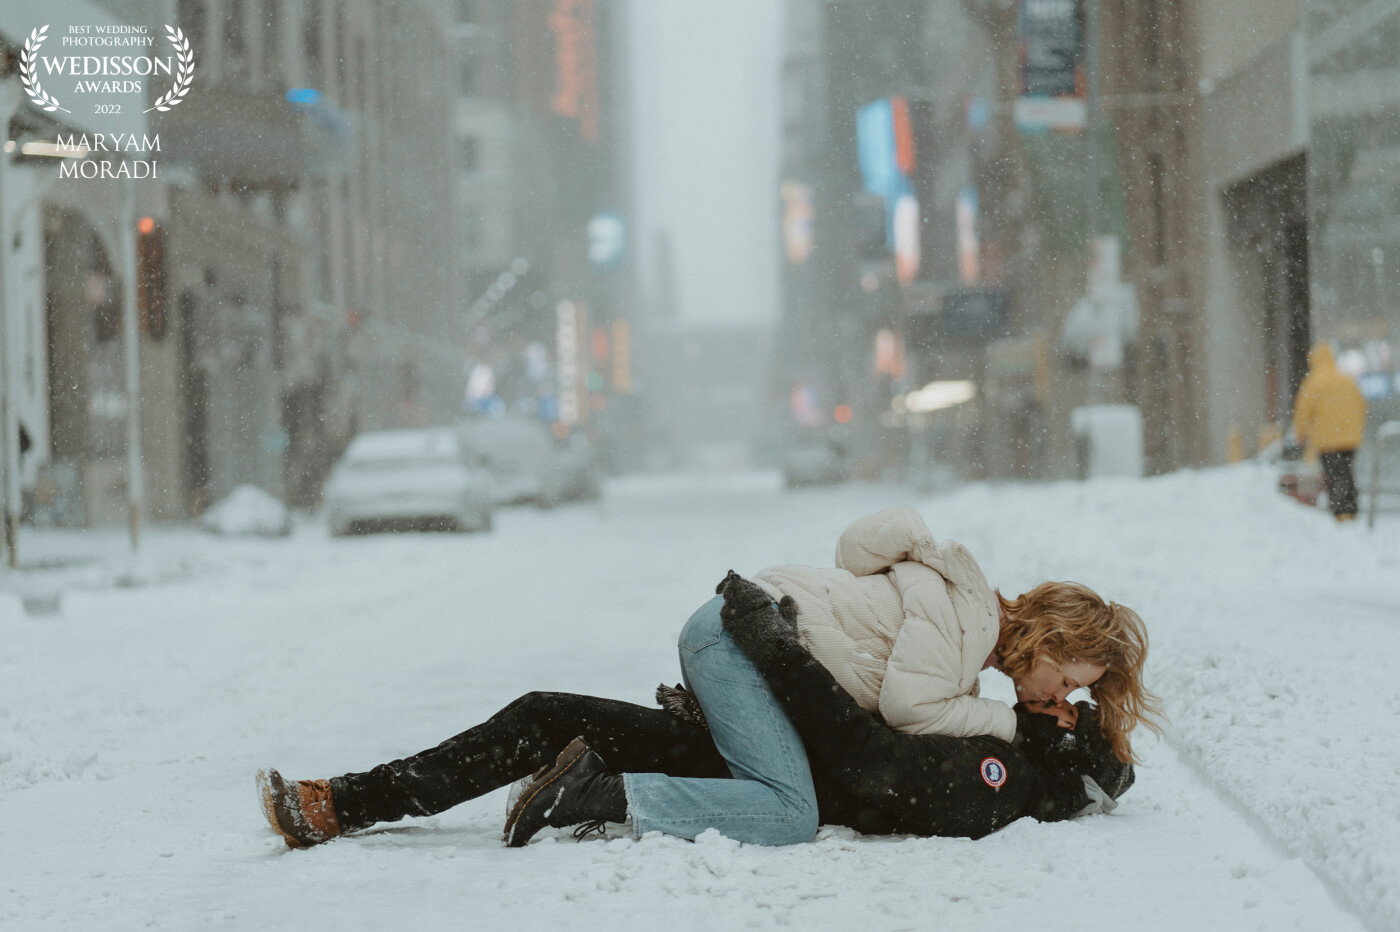 Snow in New York is mesmerizing, it can turn the busiest place in the world to a quiet place with a freezing atmosphere but right in this moment our kisses and love shattered the silence and melted the snow.<br />
<br />
@marymor_photography<br />
New York City, US